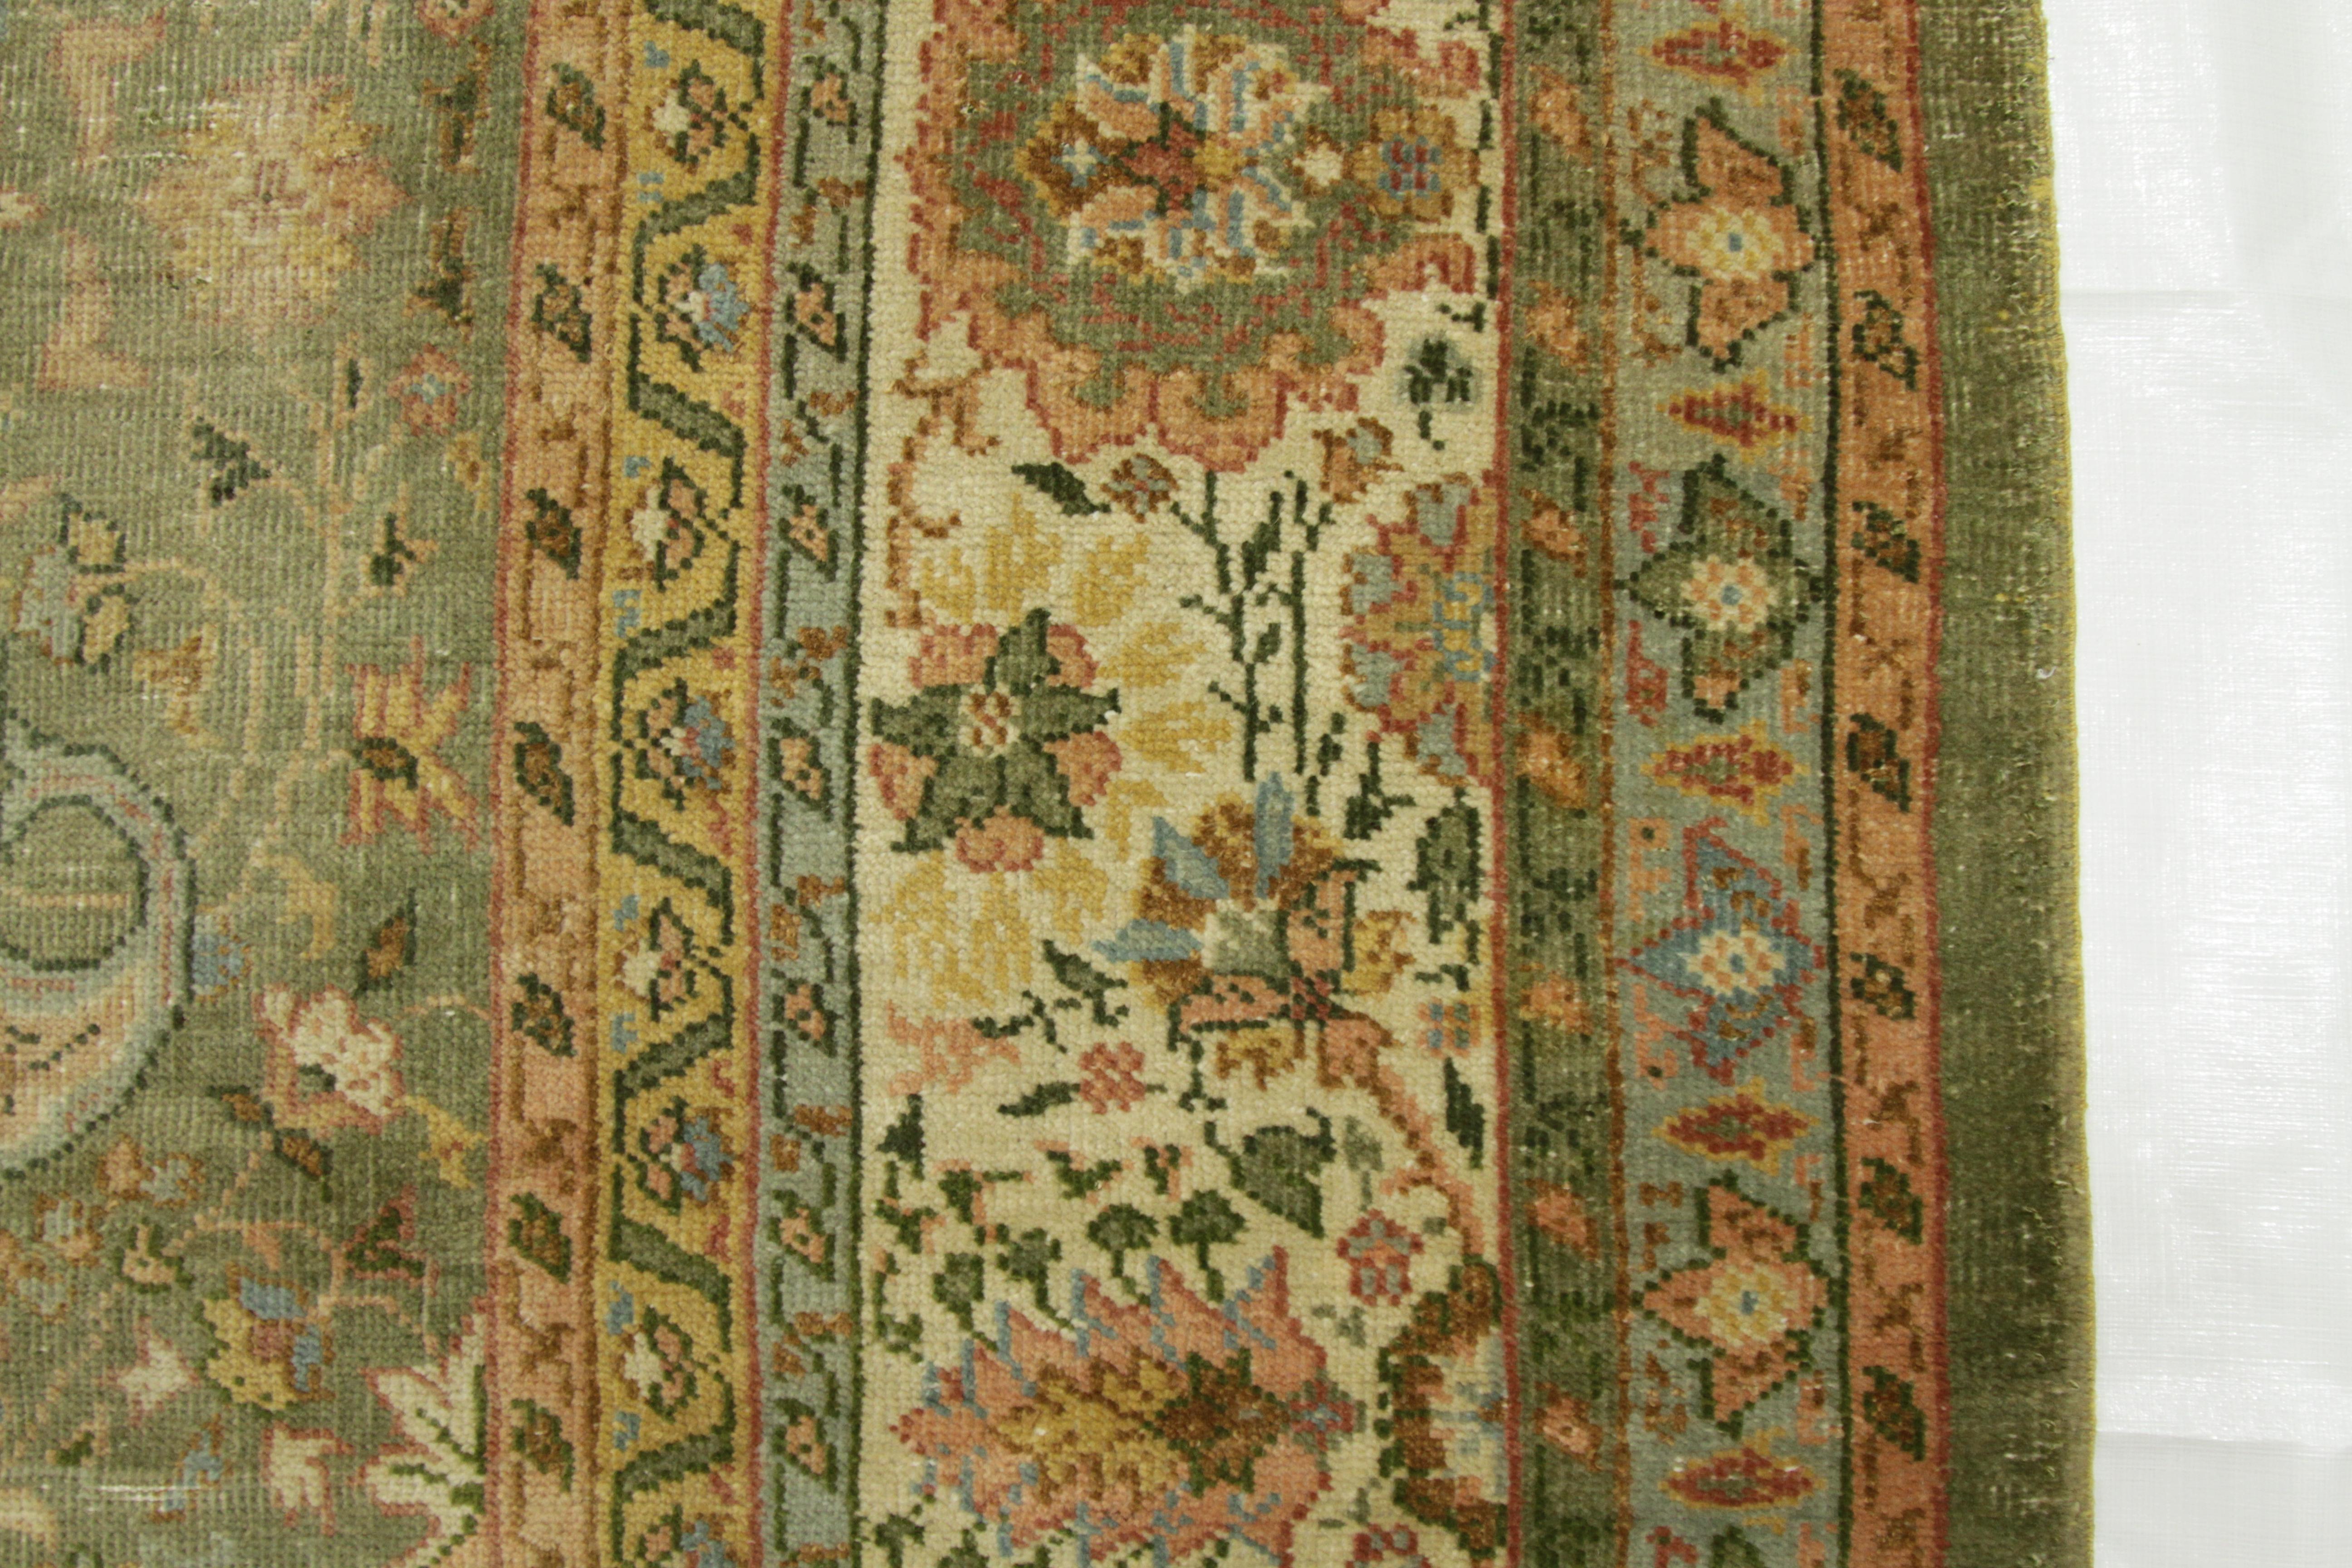 Large Antique Sultanabad Persian Rug with Green & White Floral Motif, circa 1930 For Sale 3